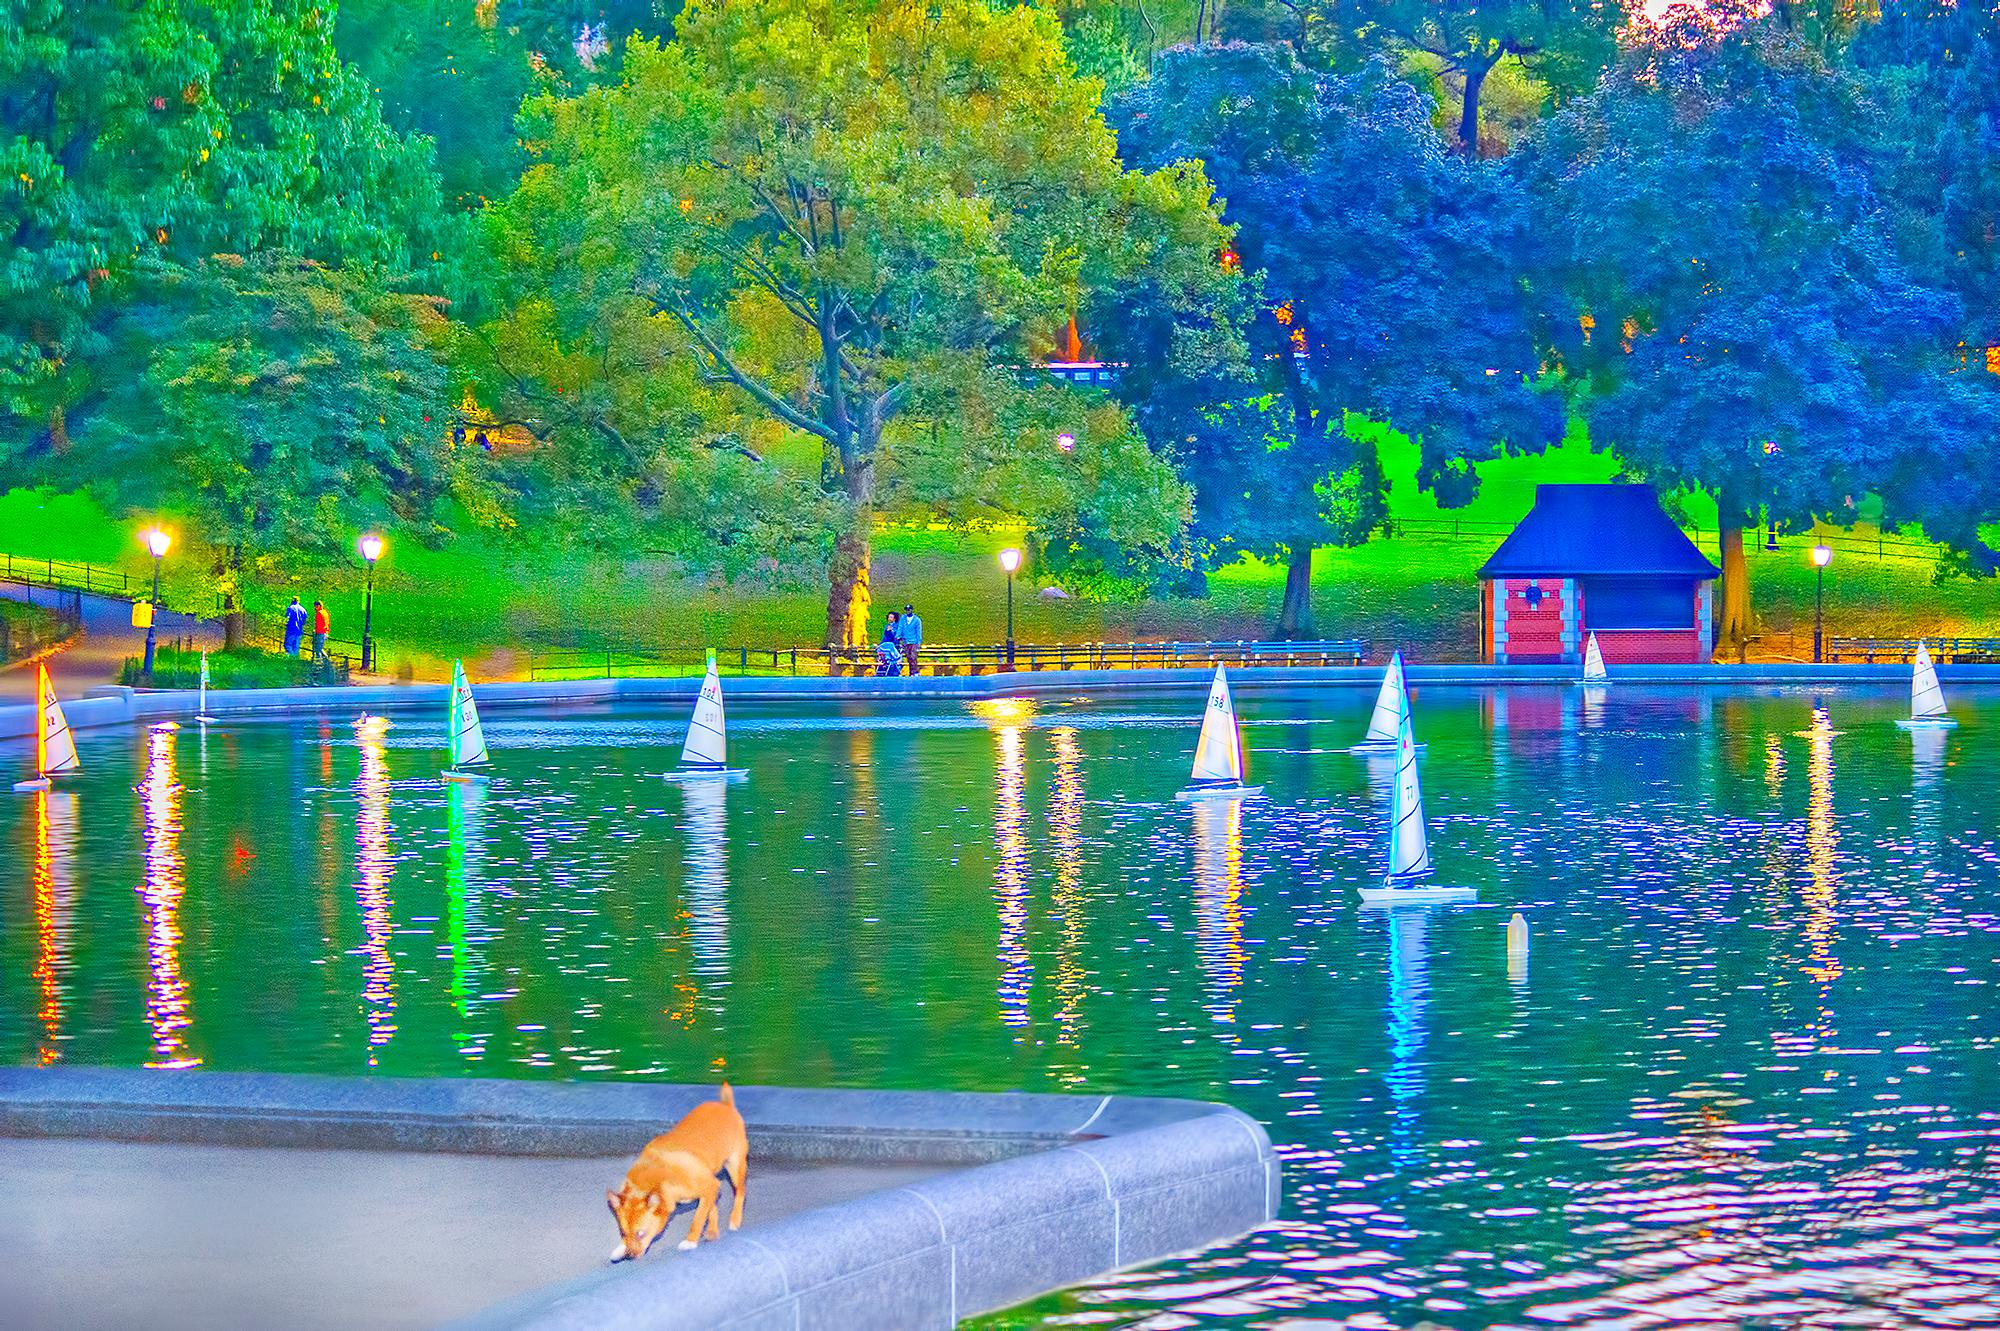 Mitchell Funk Color Photograph – Segelboote im Central Park Pond, New York City